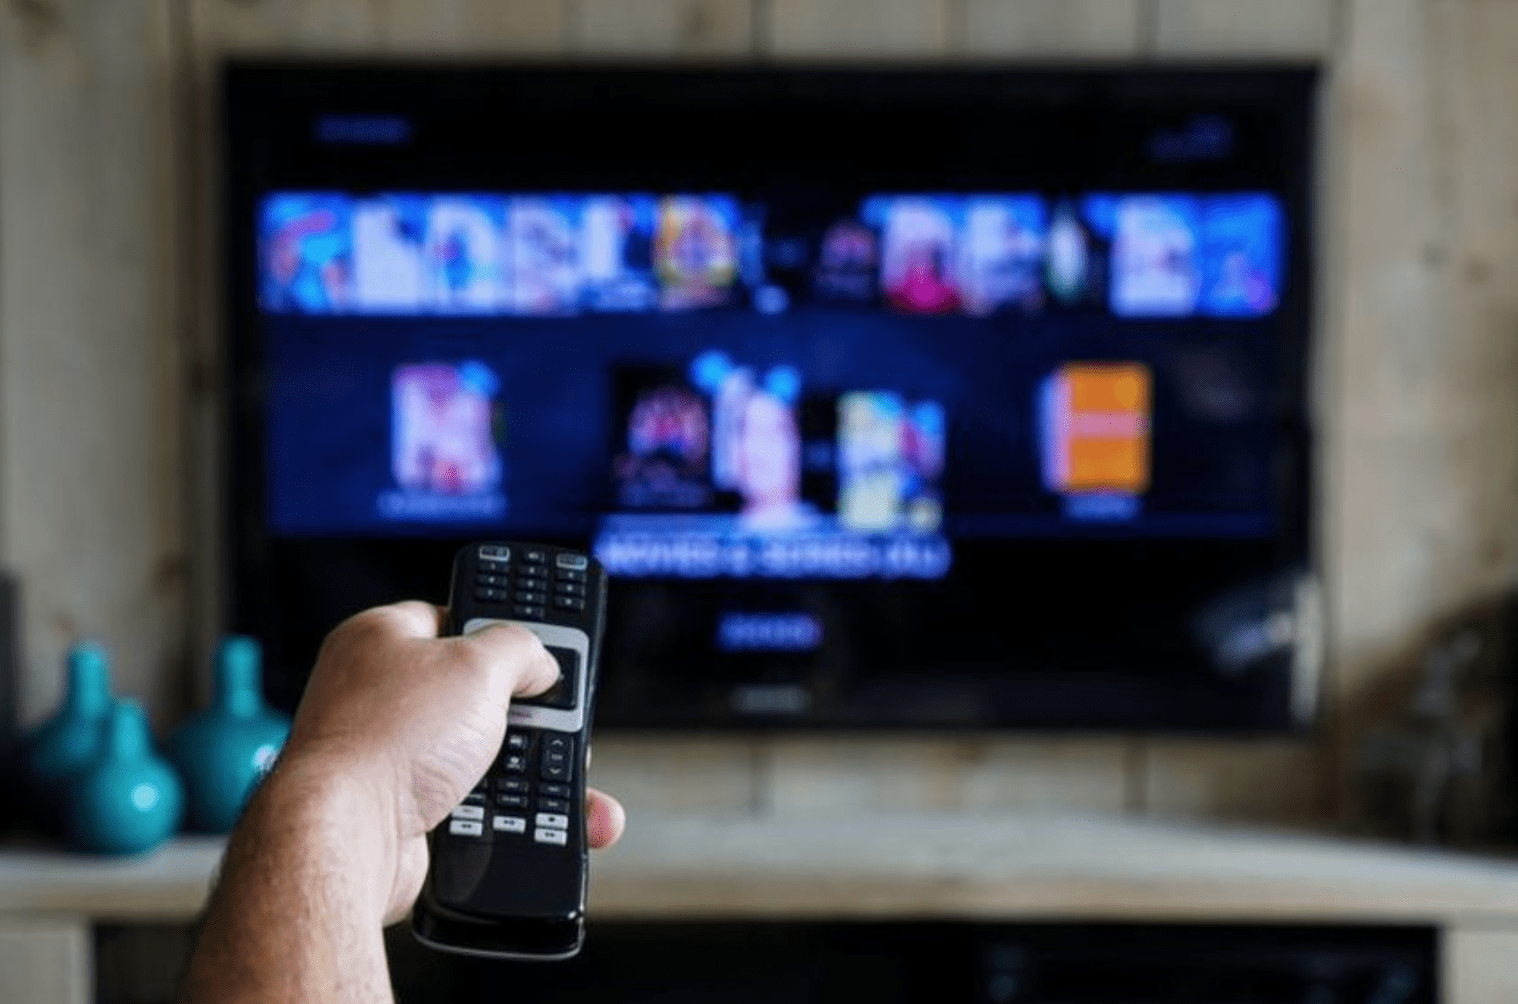 Why is IPTV more popular than cable?